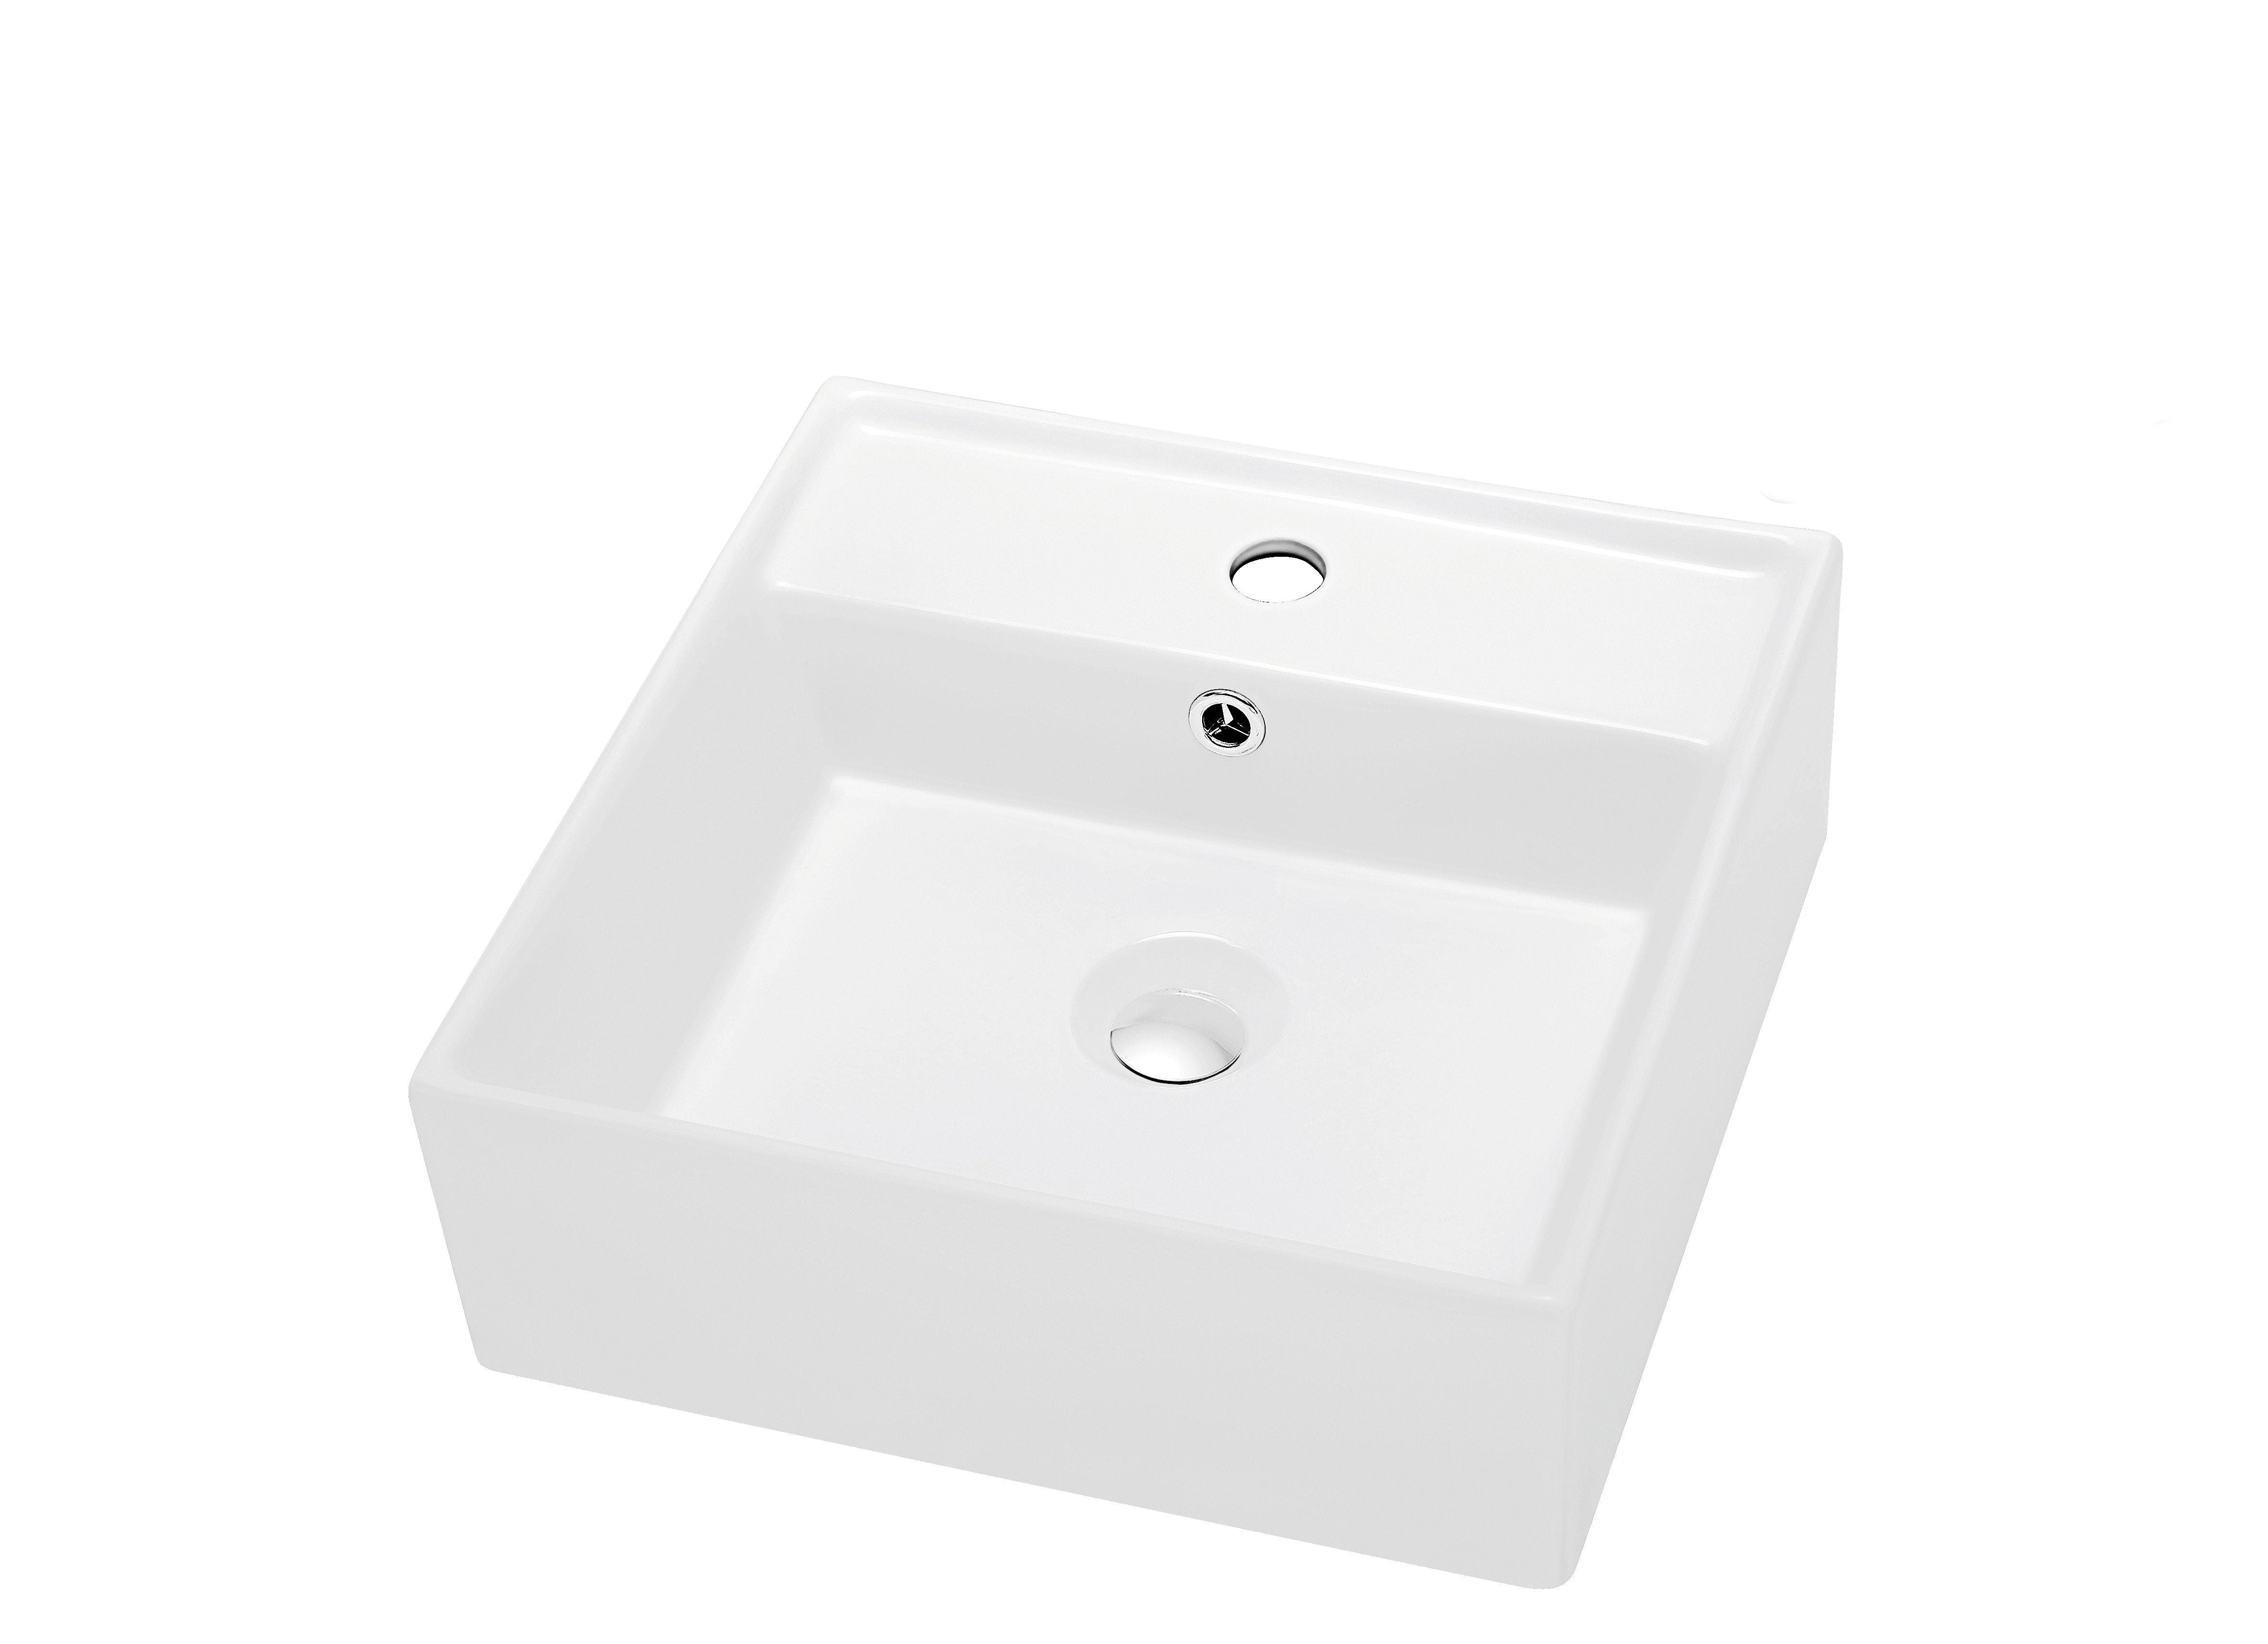 Dawn Vessel Above-Counter Square Ceramic Art Basin with Single Hole for Faucet-Bathroom Sinks Fast Shipping at DirectSinks.